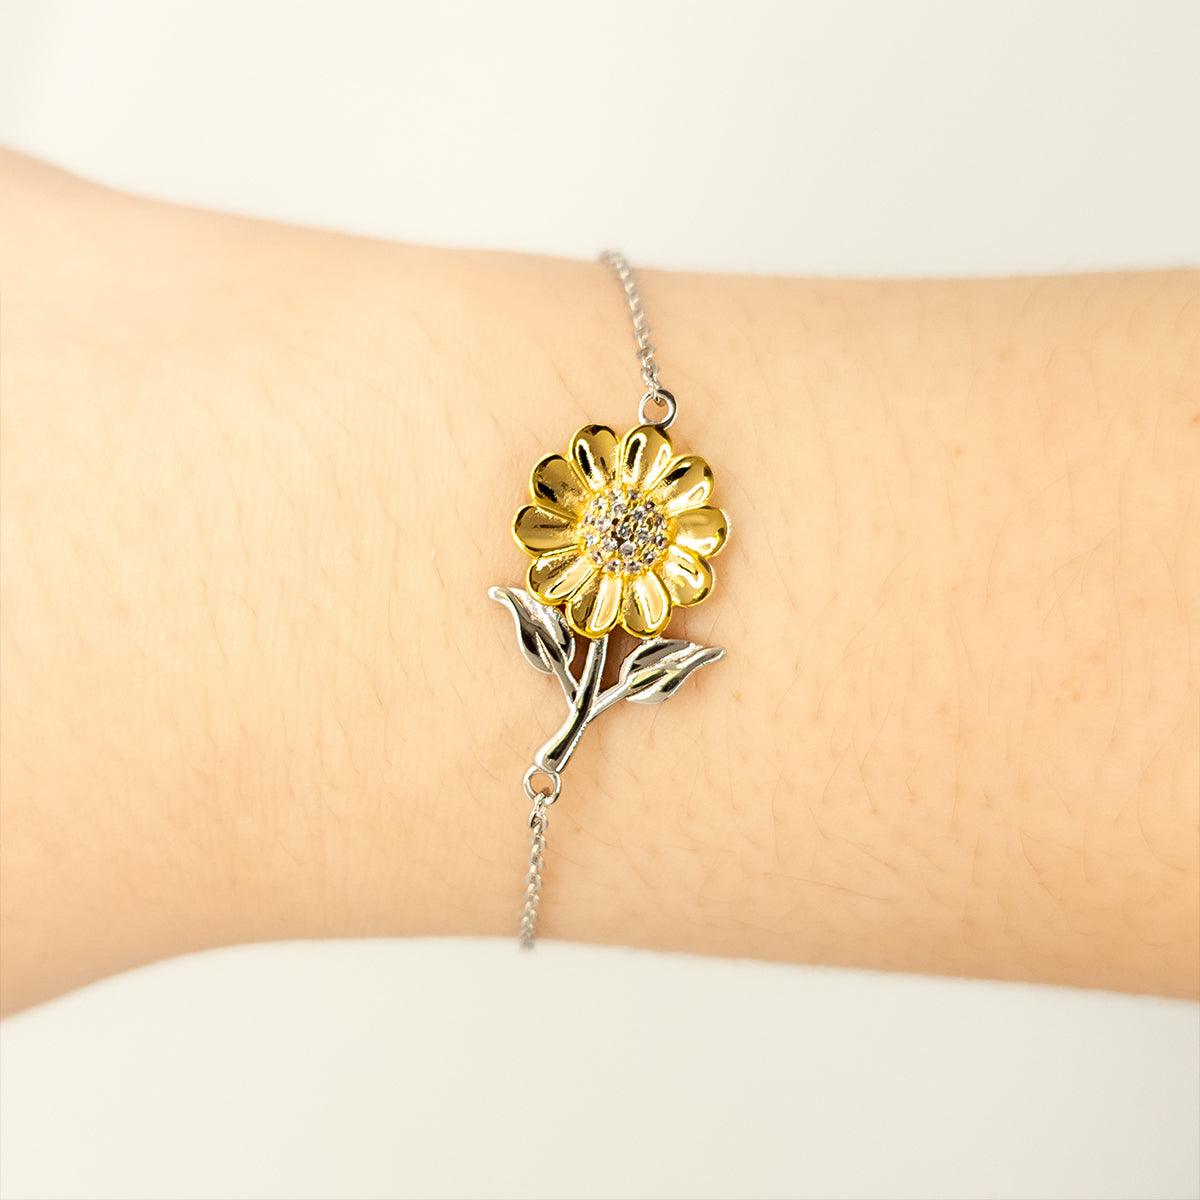 Sarcastic Childcare Worker Sunflower Bracelet Gifts, Christmas Holiday Gifts for Childcare Worker Birthday Message Card, Childcare Worker: Because greatness is woven into the fabric of every day, Coworkers, Friends - Mallard Moon Gift Shop